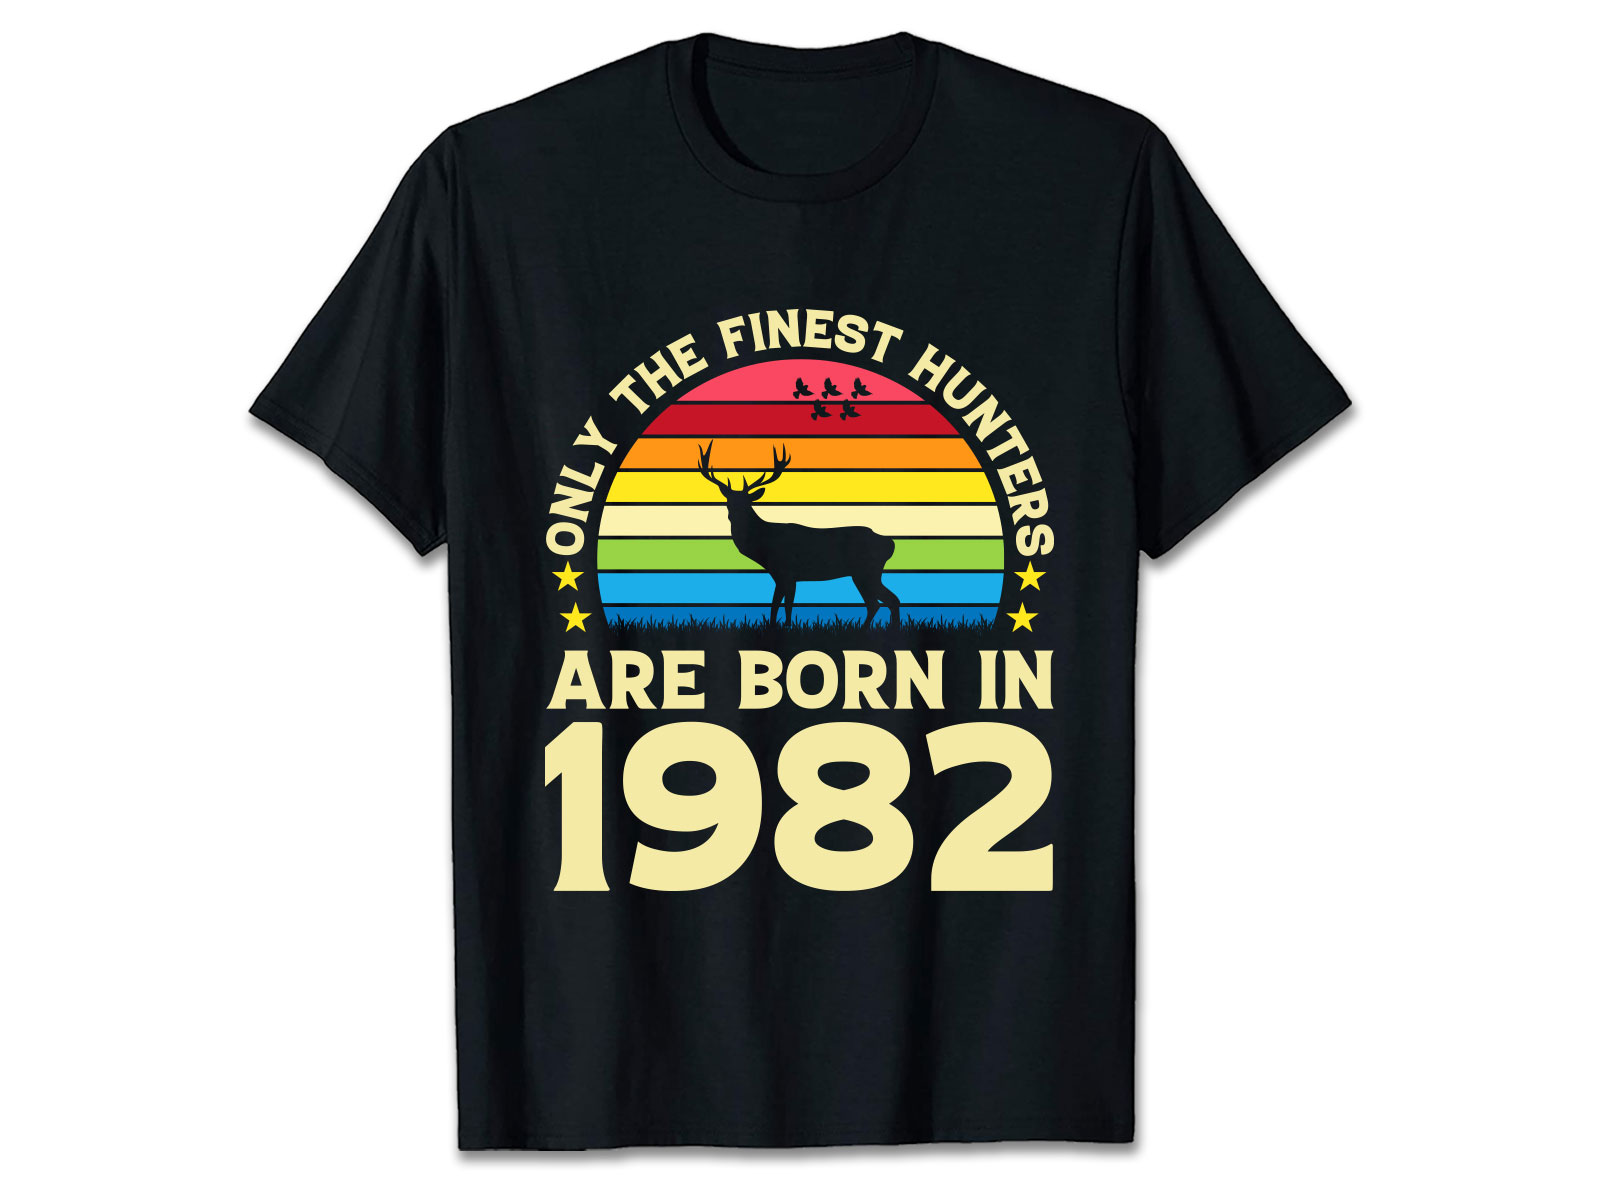 only the finest hunters are born in 1982 252